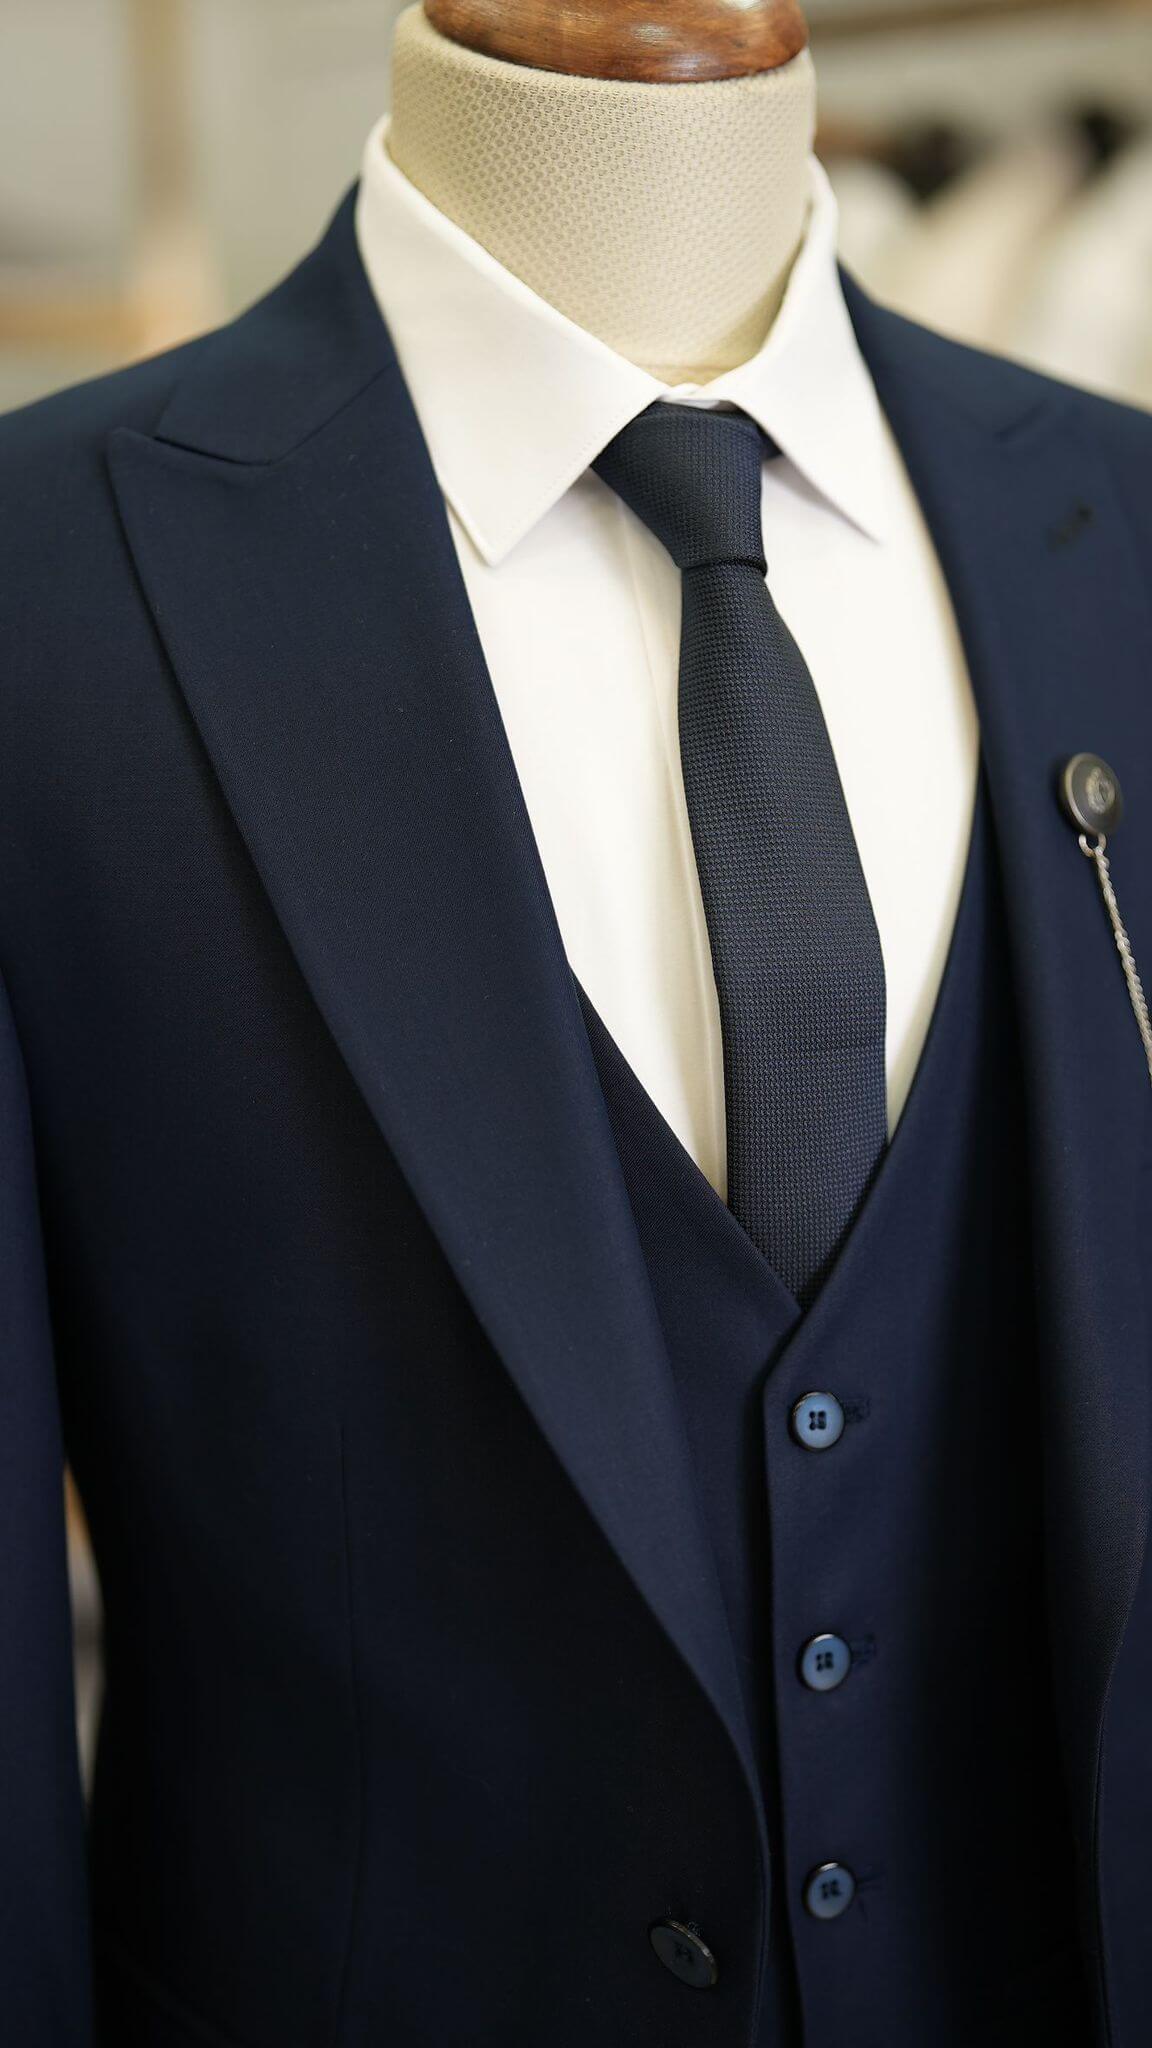 A Navy-Blue Suit on display.